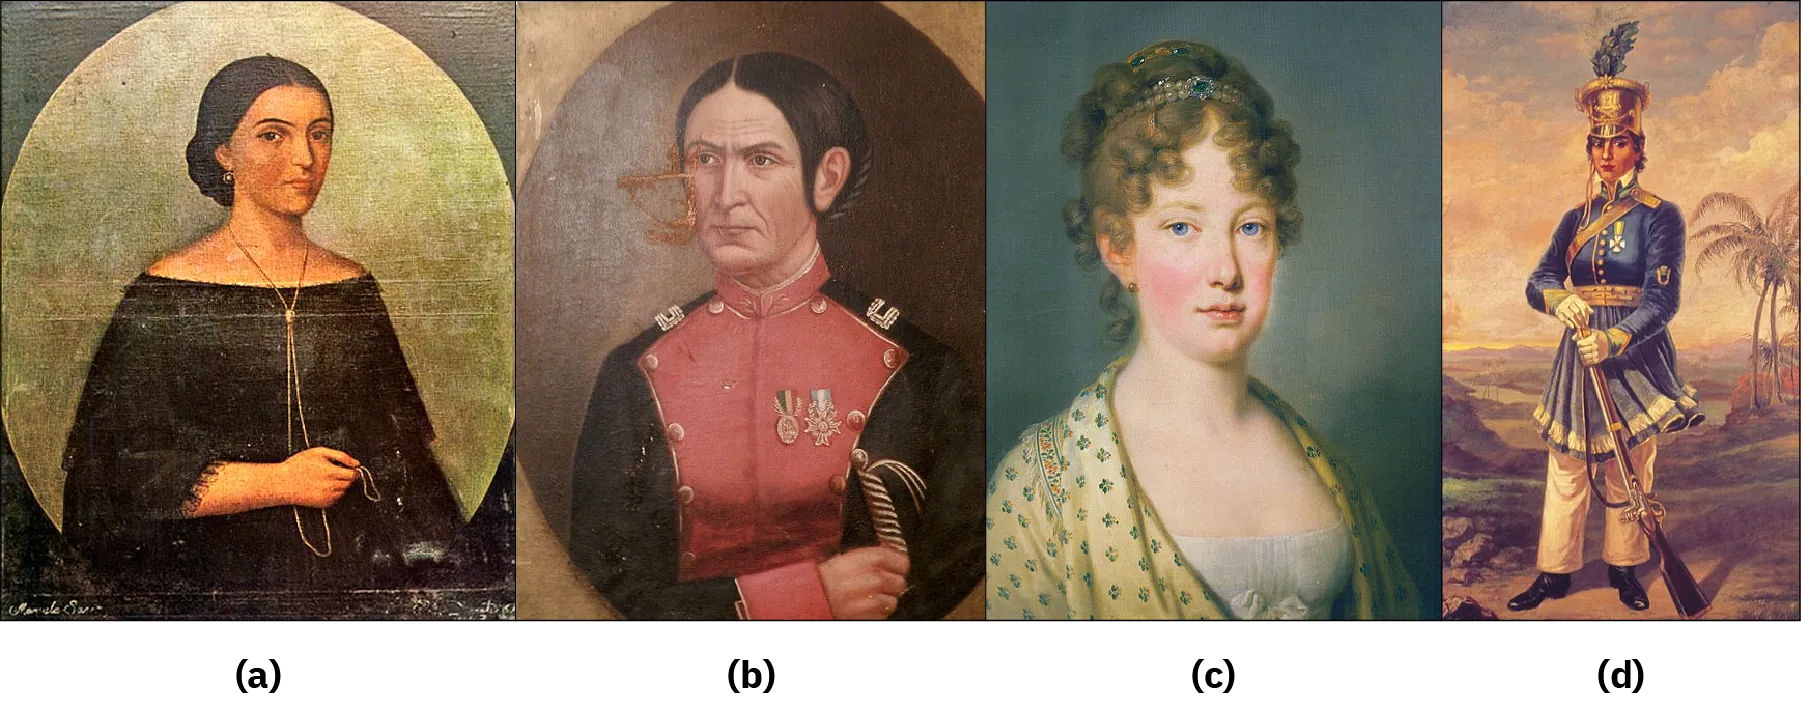 Image (a) is a painting of Manuela Saenz, she wears a black dress and a necklace. Image (b) is a painting of Juana Azurduy de Padilla, she wears a military uniform which is decorated with medals and she holds a sword. Image (c) is a painting of Empress Maria Leopoldina, she wears a dress. Image (d) is a painting of Maria Quitéria, she wears a military uniform and carries a gun.